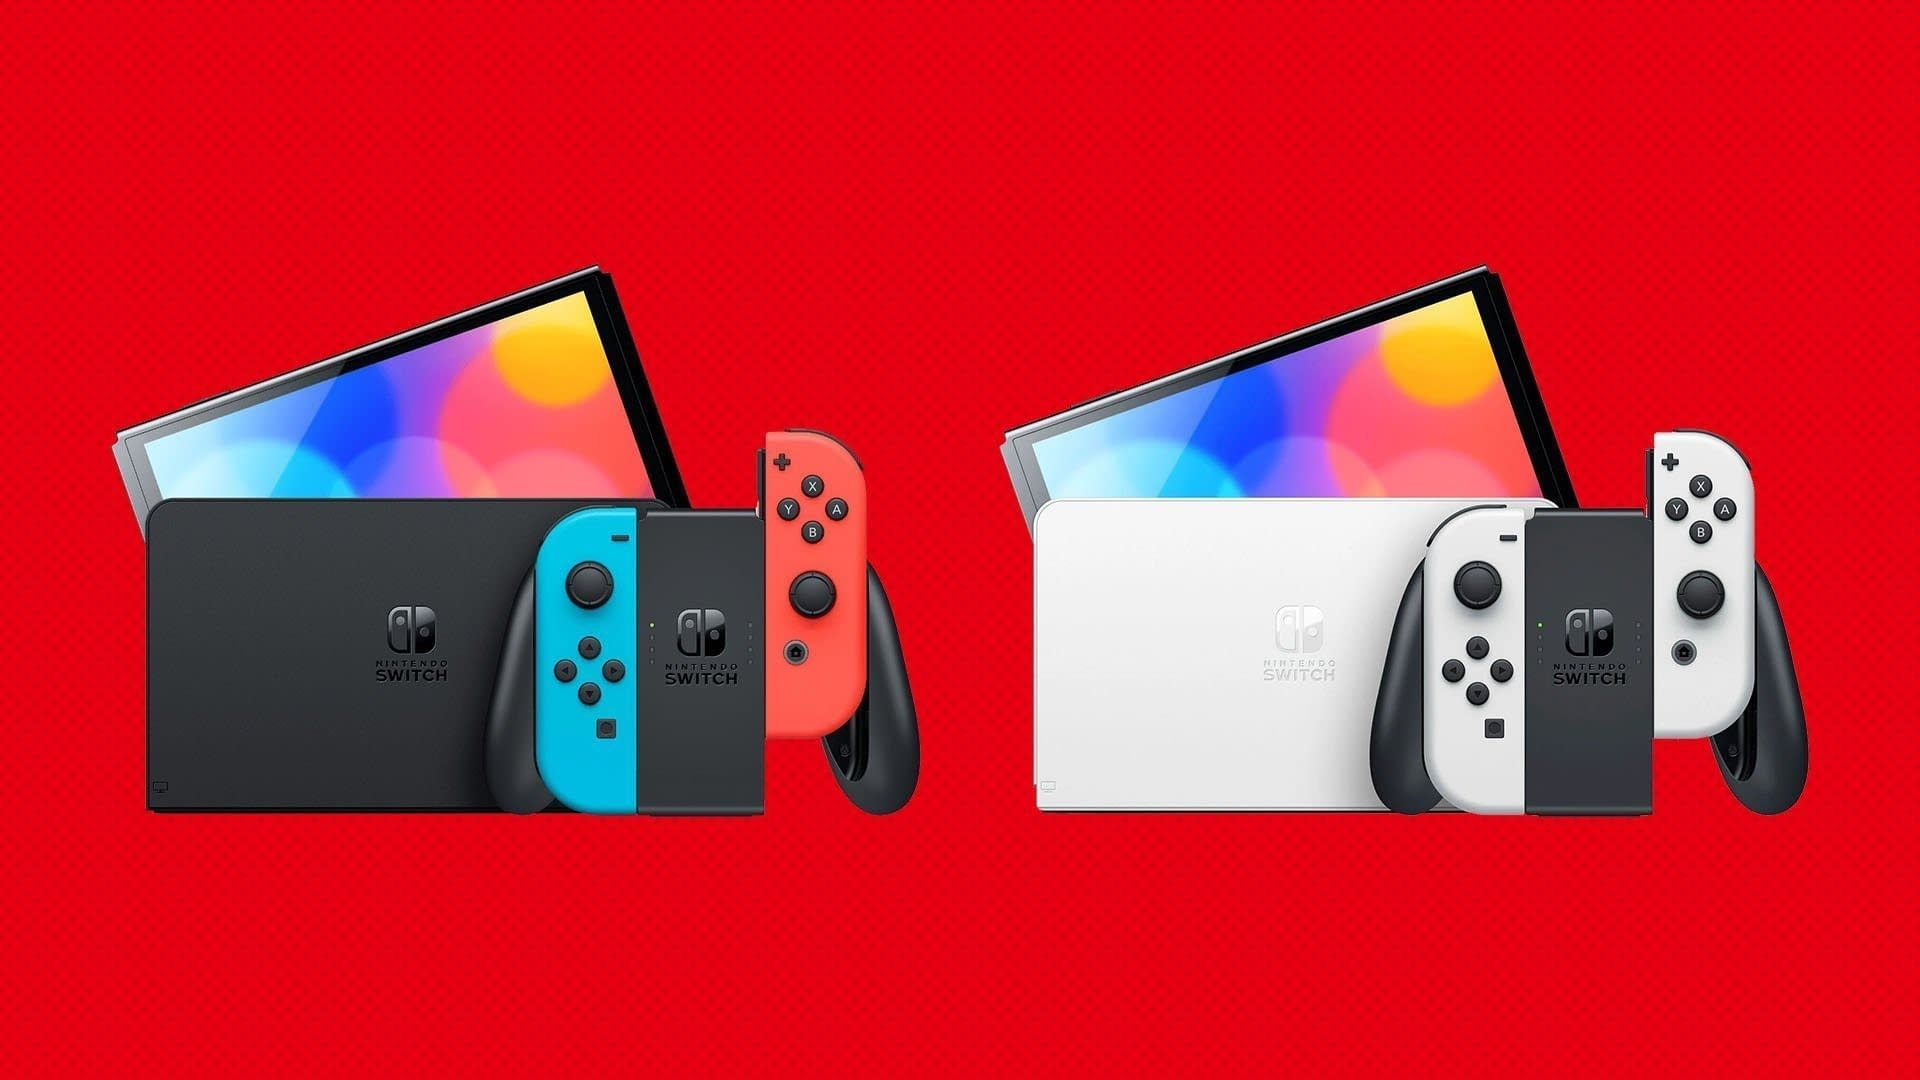 Switch Console Continues to Sell: Here’s New Number of Sales